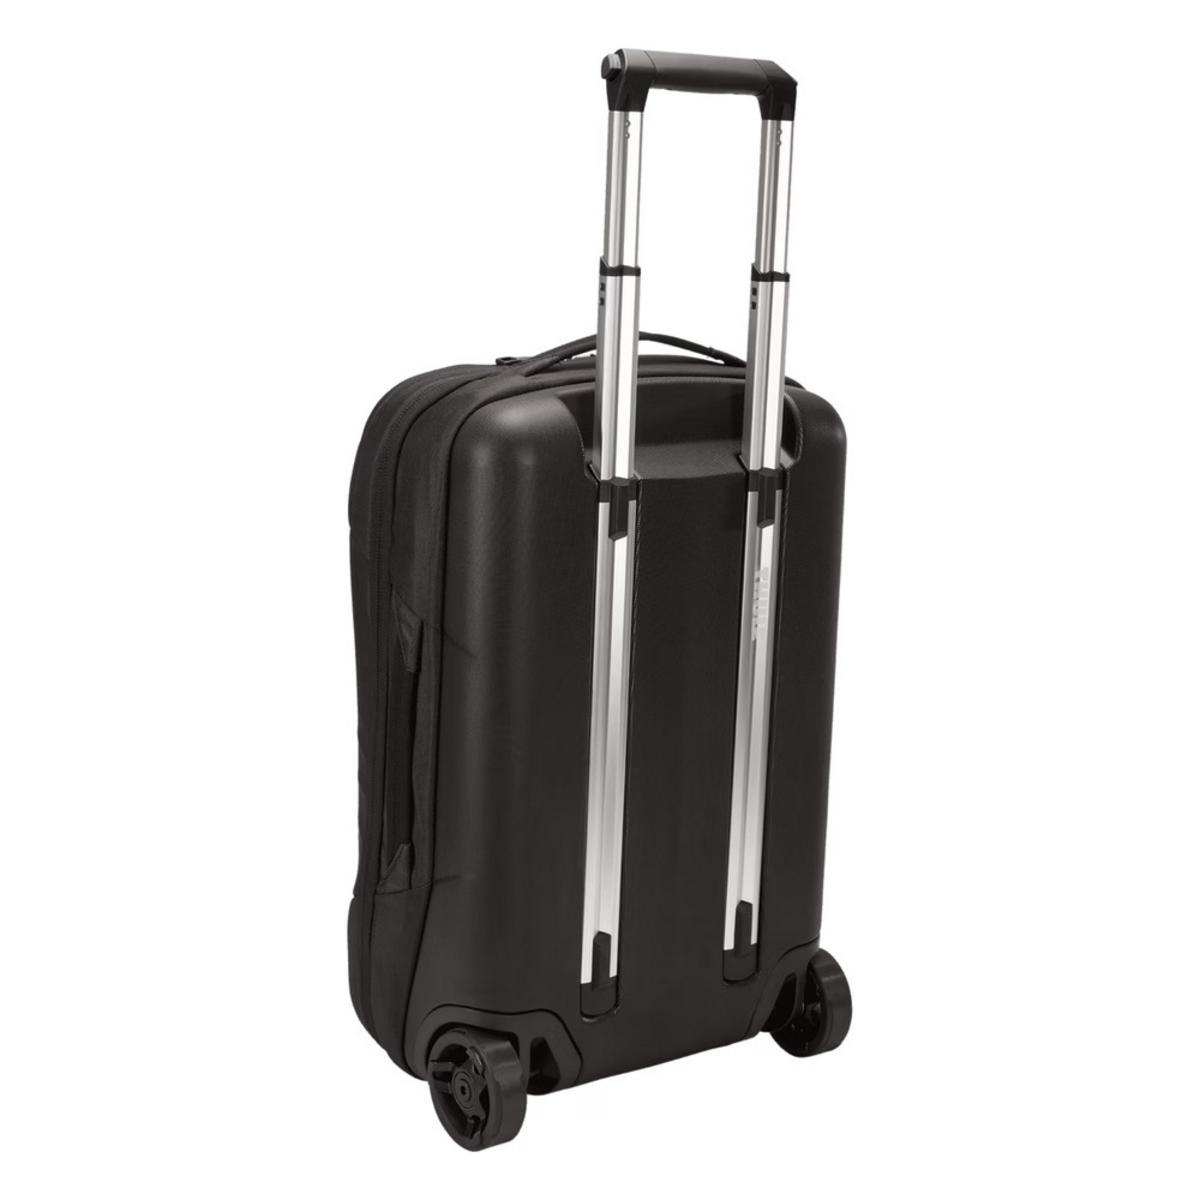 Thule Subterra Carry On 36L Luggage Bag - Black